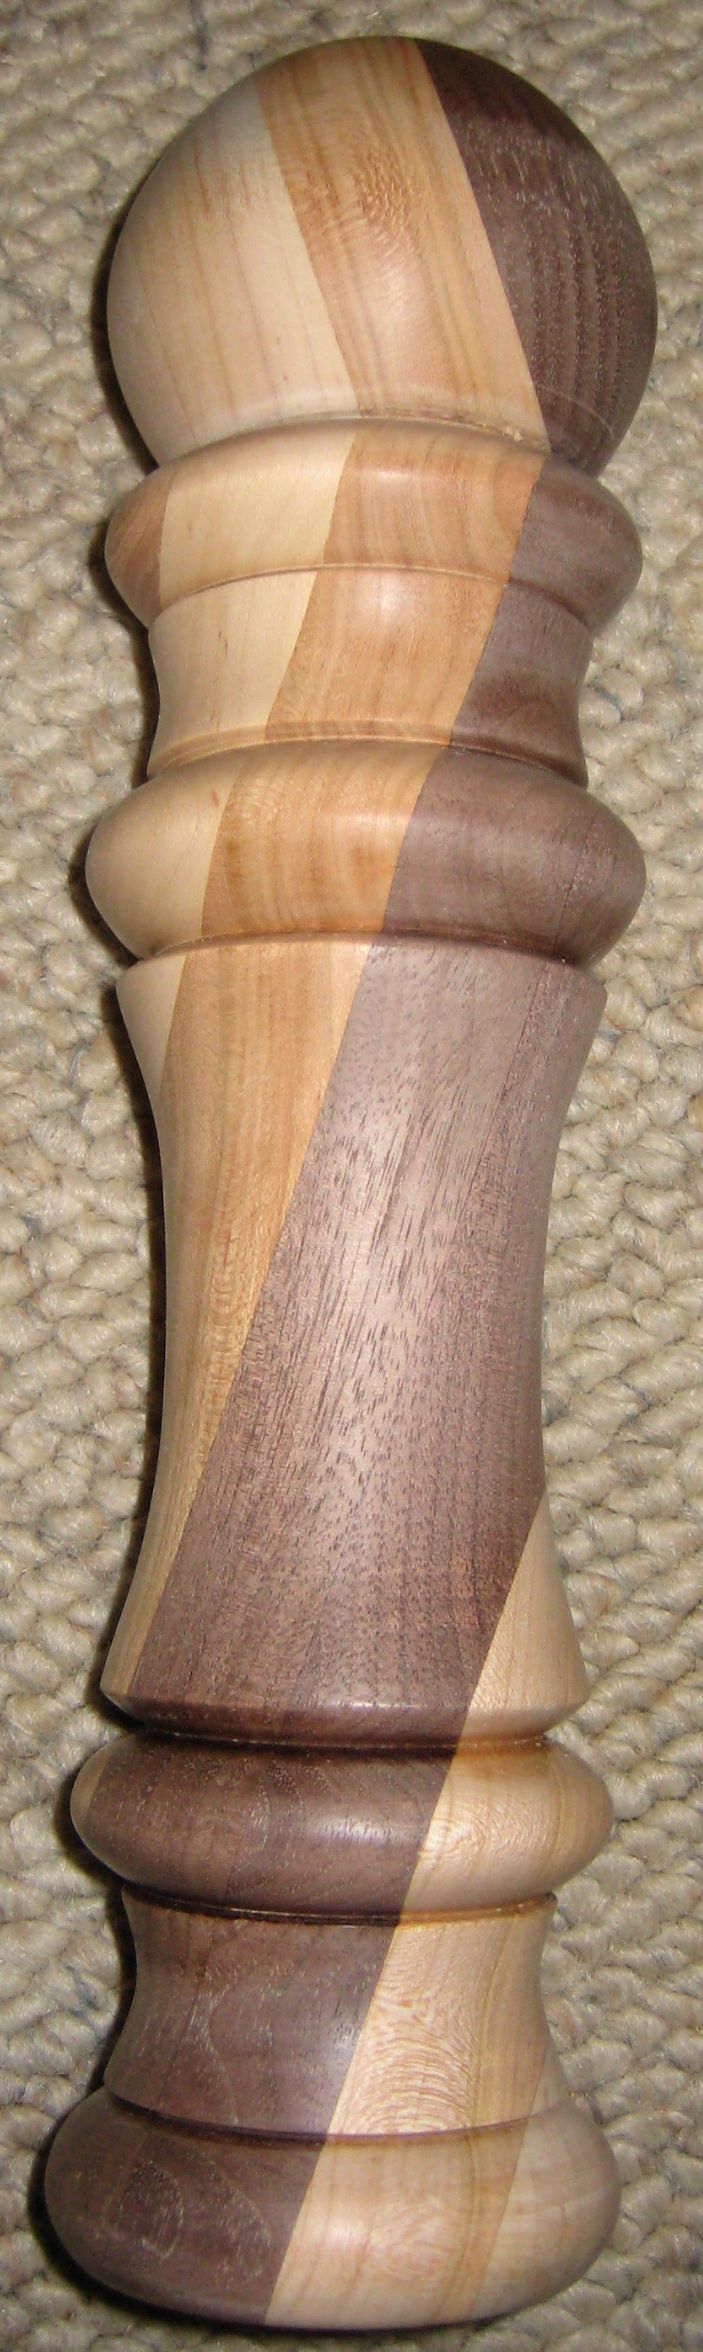 Laminated Peppermill #2